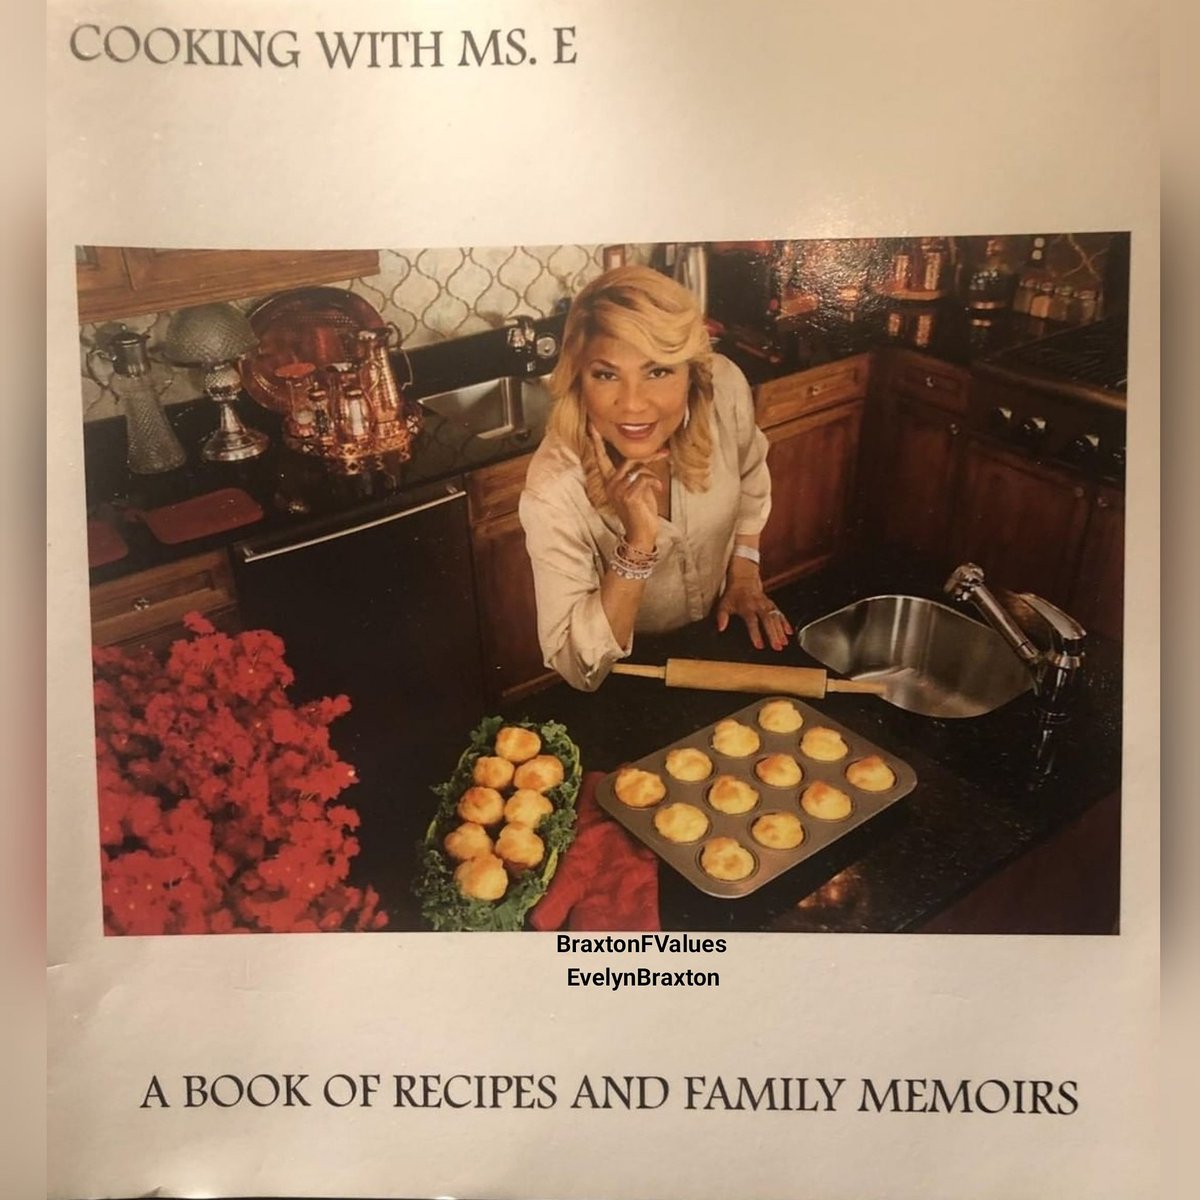 RT @BraxtonFValues: #CookingwithMsE 
A Book of Recipes & Family Memoirs
Coming soon! @evelynbraxton #BFV https://t.co/jWROk8YzFZ